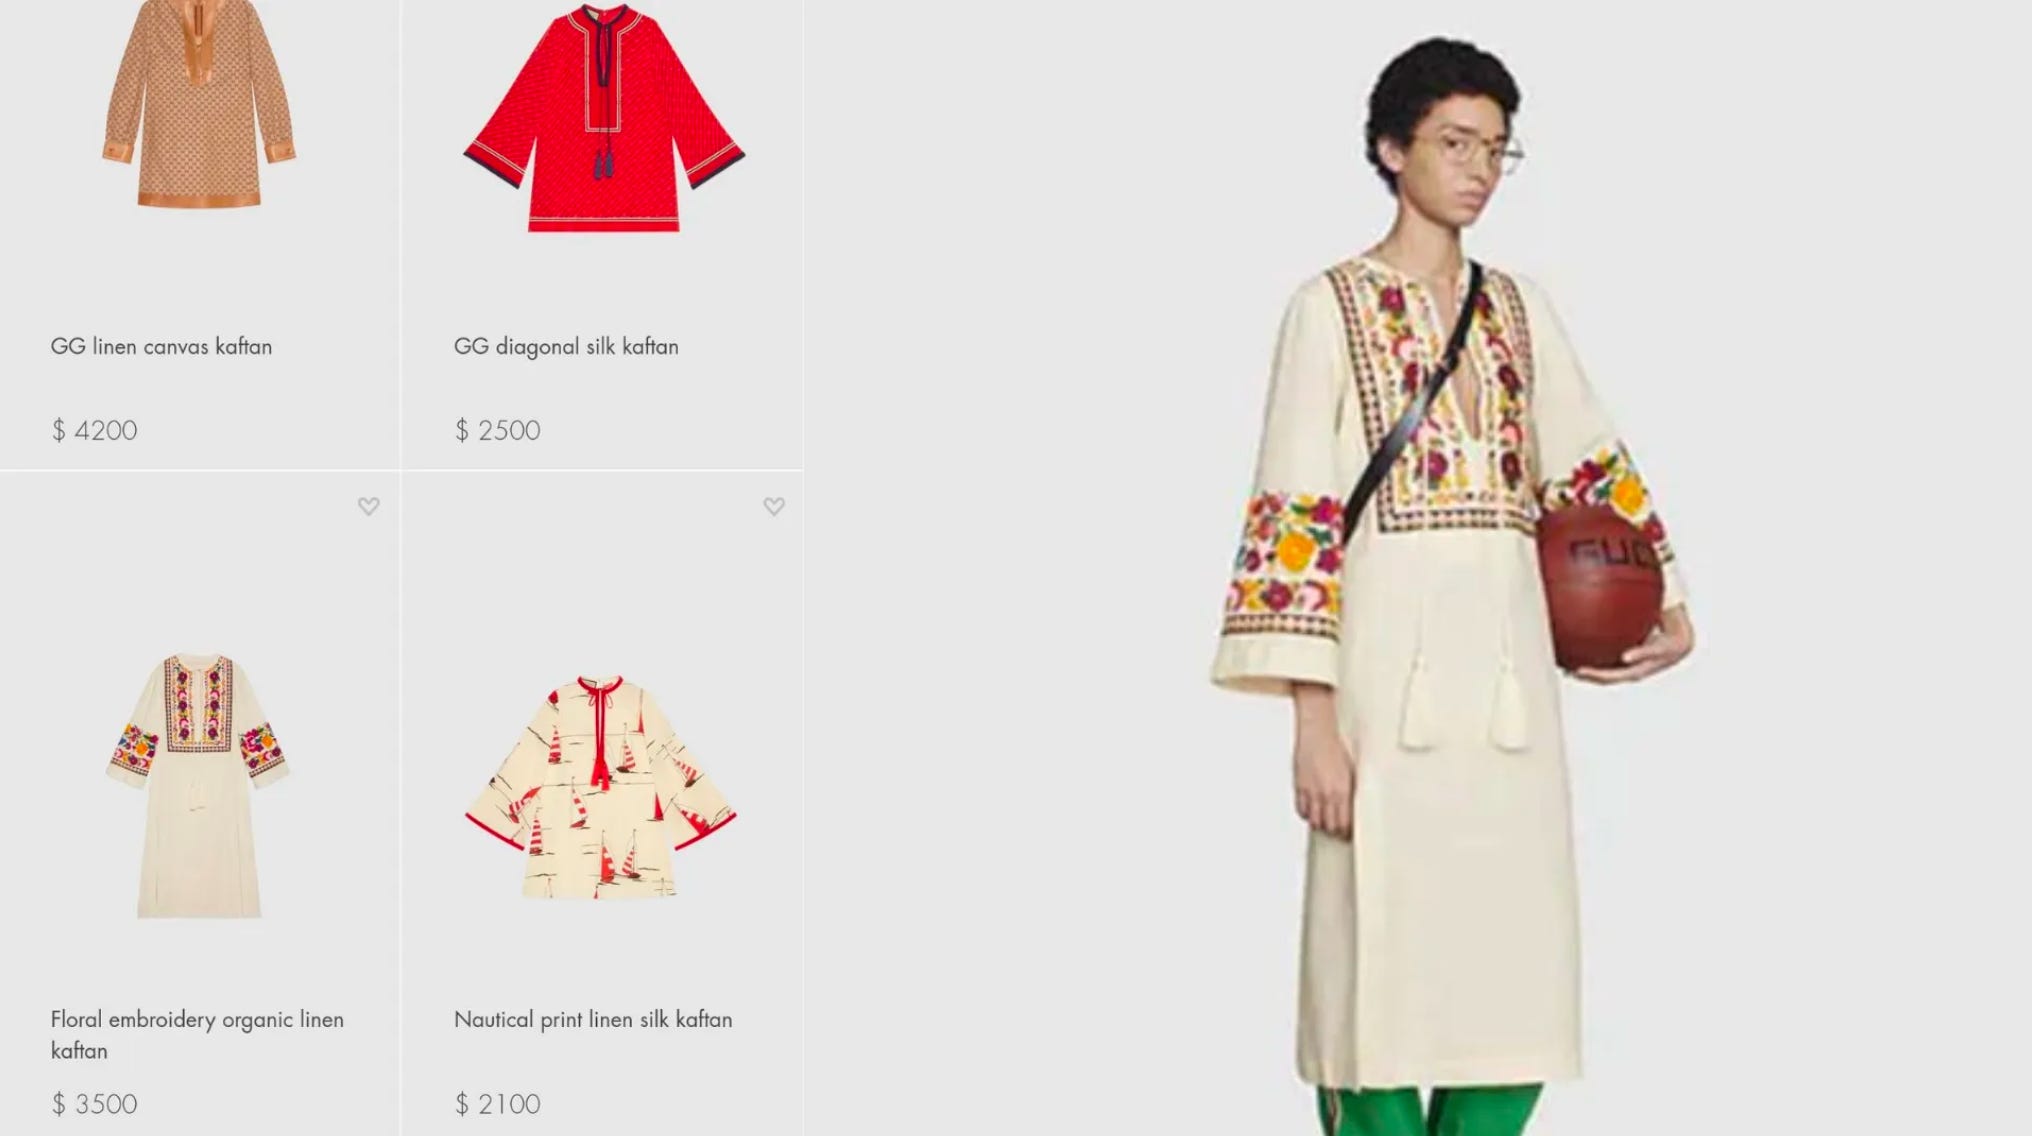 Are Louis Vuitton and Nordstrom appropriating Palestinian culture